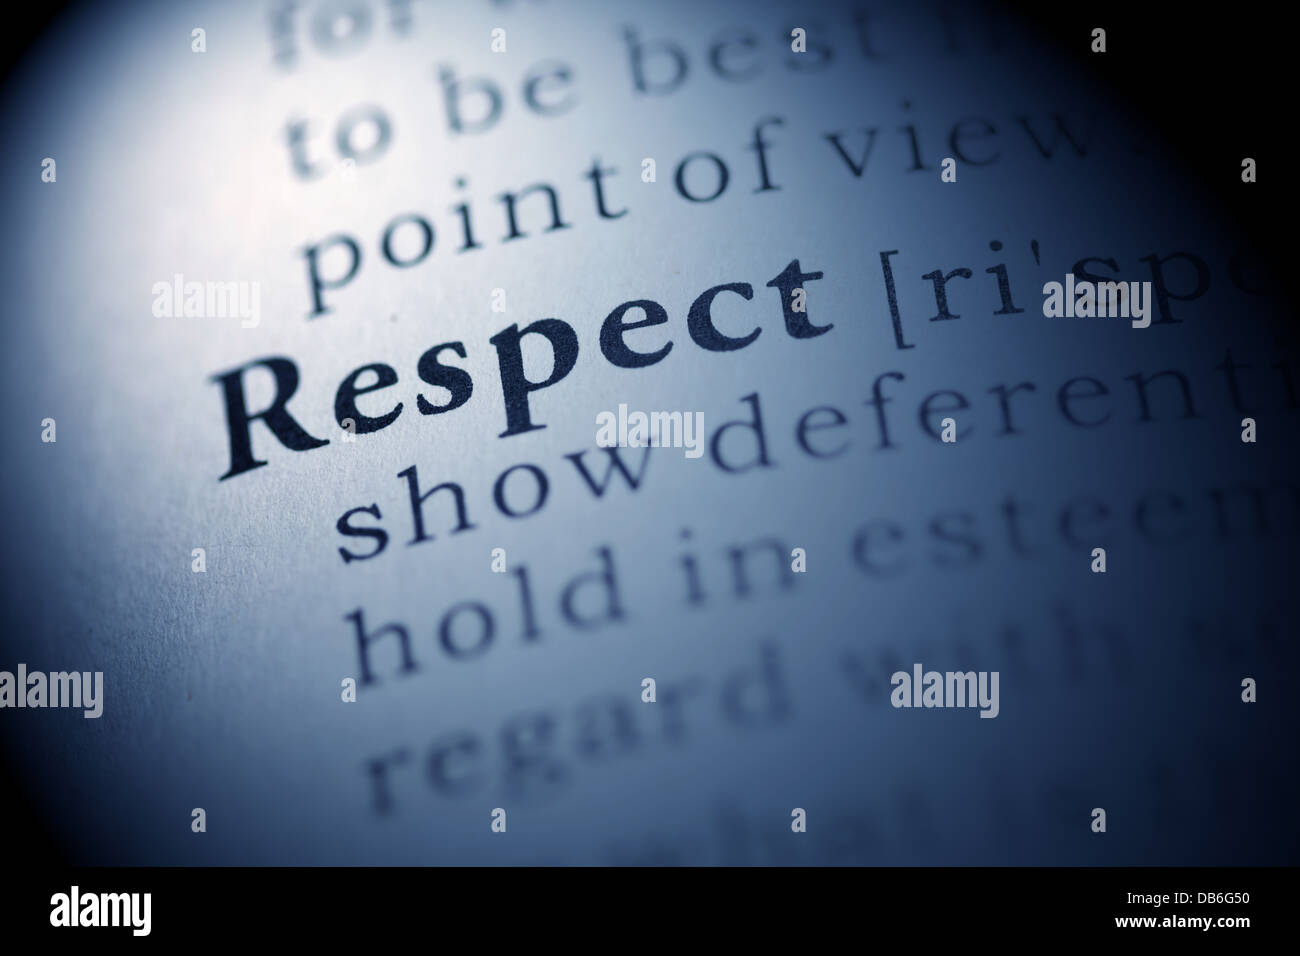 Fake Dictionary, Dictionary definition of the word Respect. Stock Photo